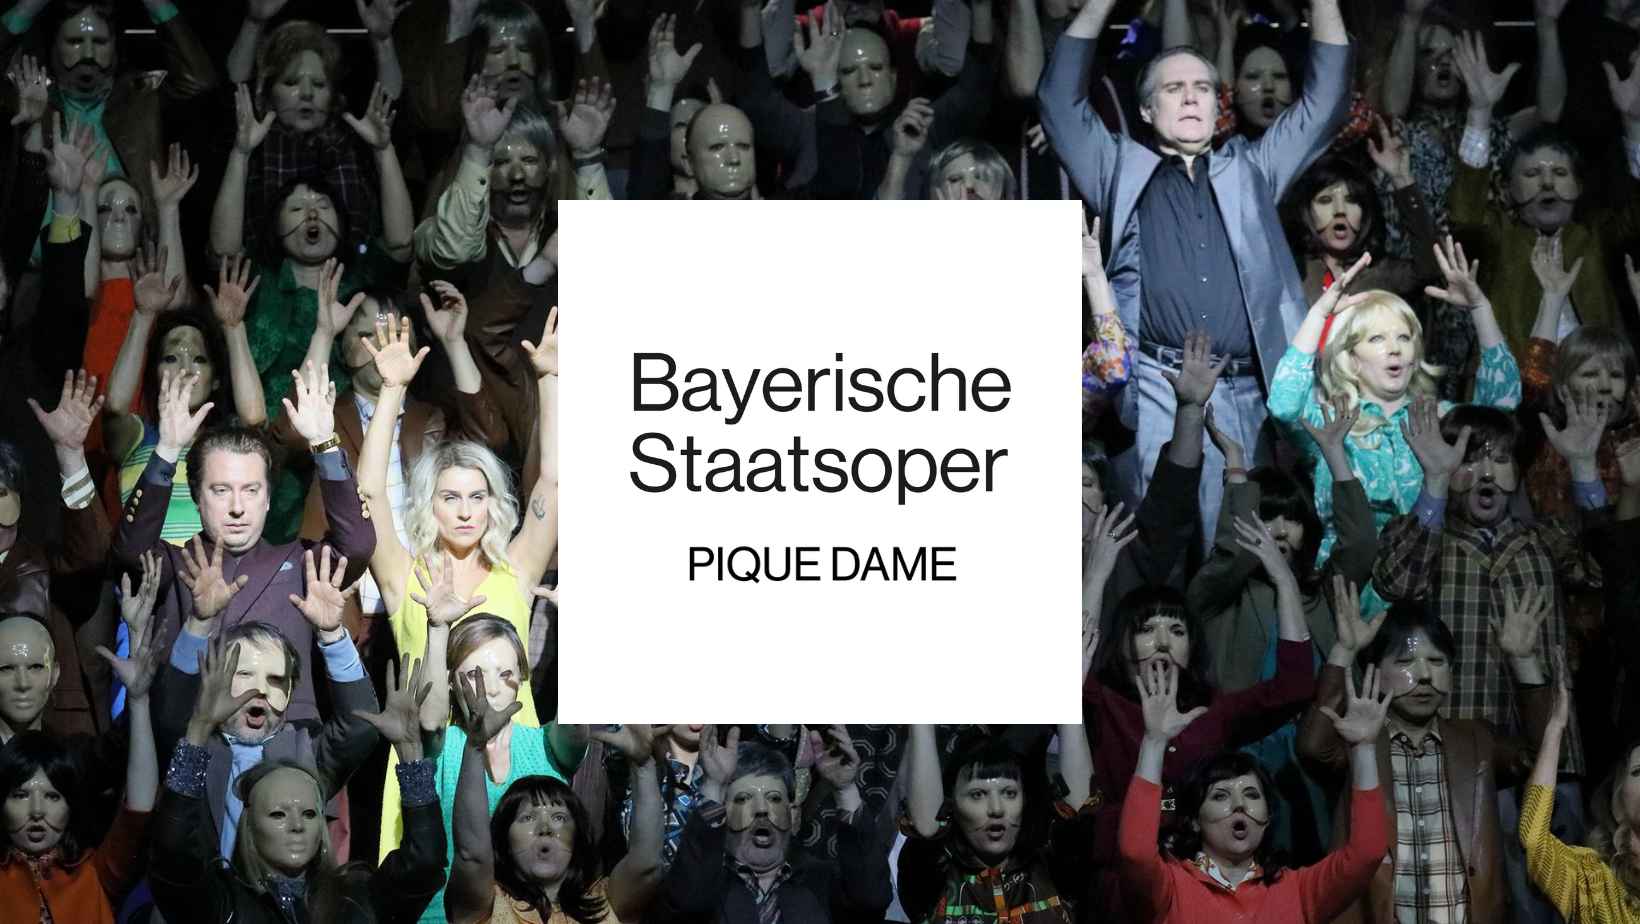 Bayerische Staatsoper presents a new Pique Dame production with a stellar cast 
 